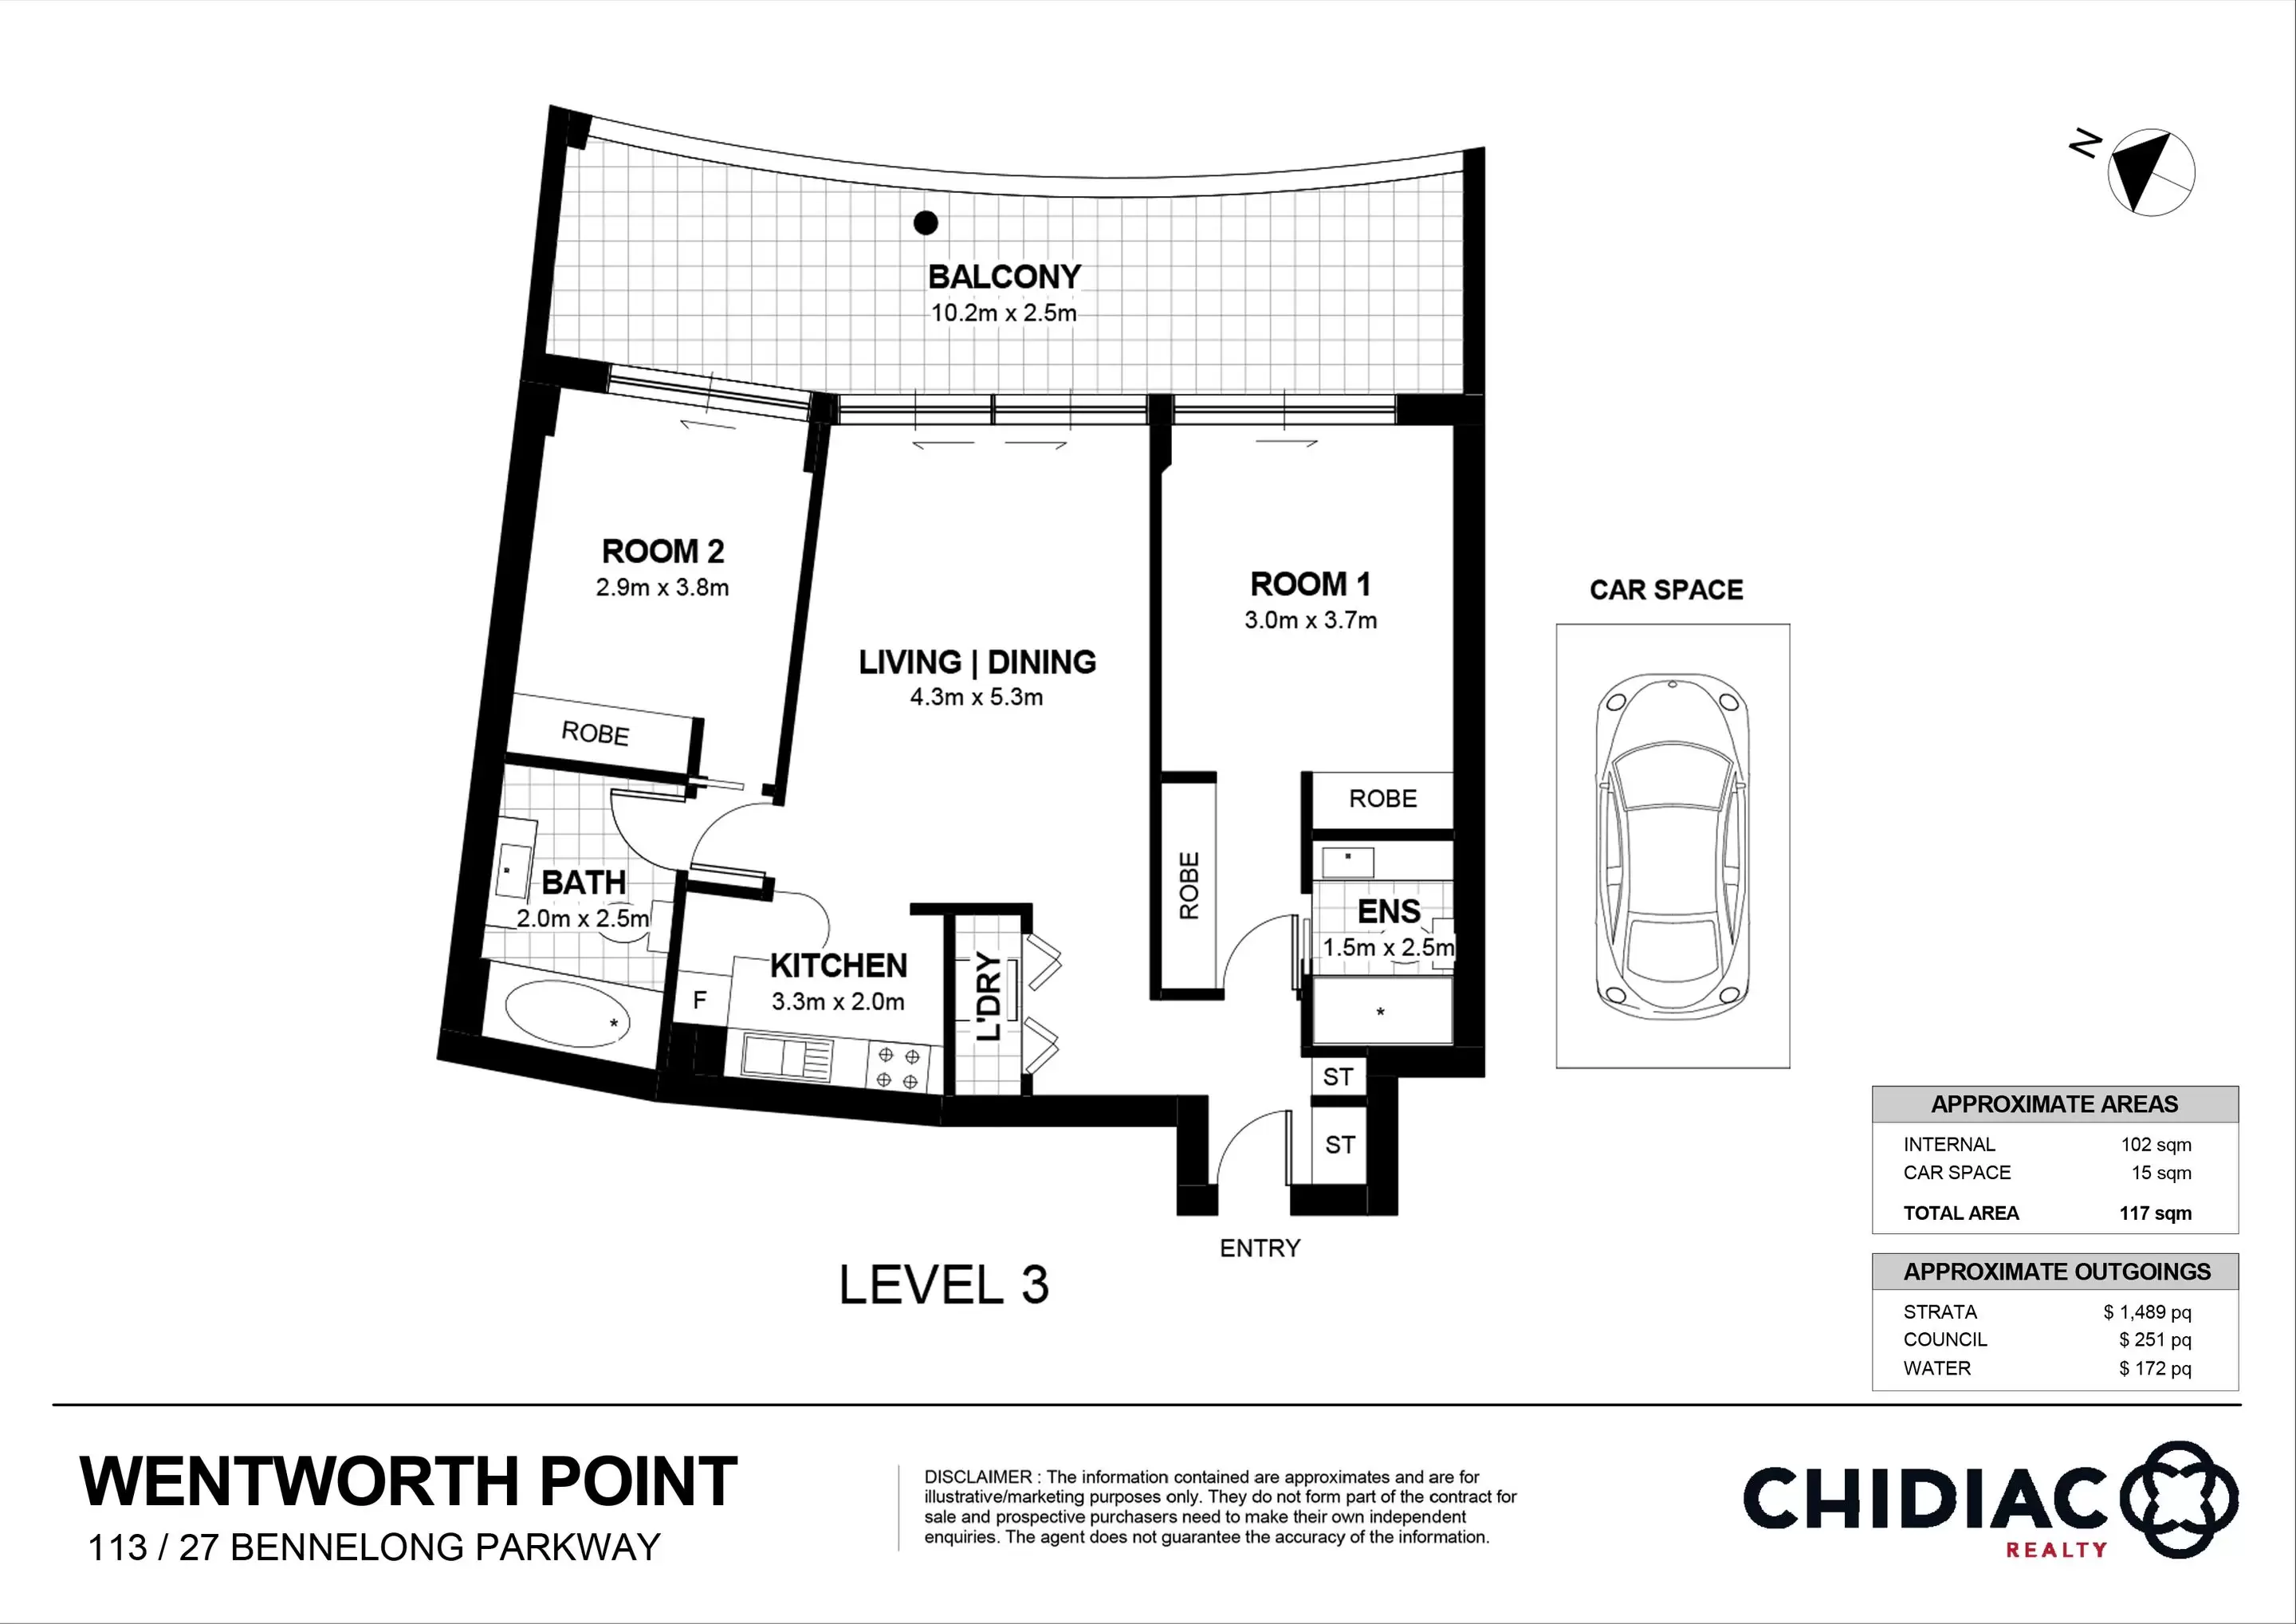 113/27 Bennelong Parkway, Wentworth Point Leased by Chidiac Realty - floorplan